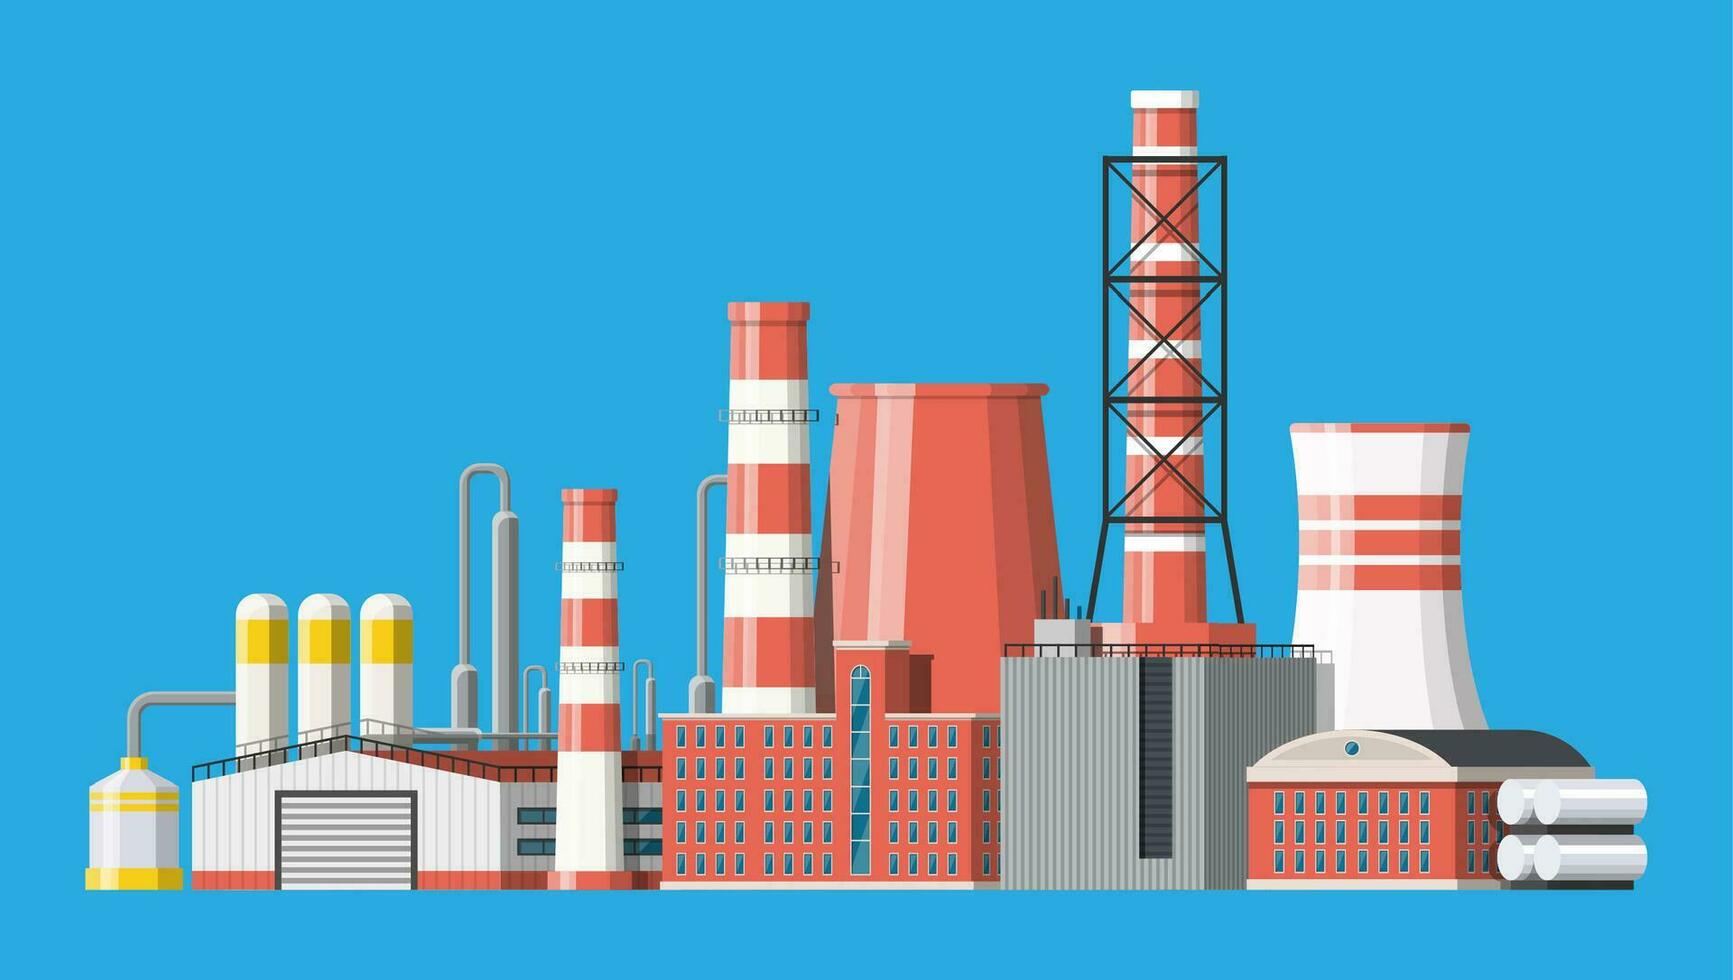 Factory icon building. Industrial factory, power plant. Pipes, buildings, warehouse, storage tank. Vector illustration in flat style